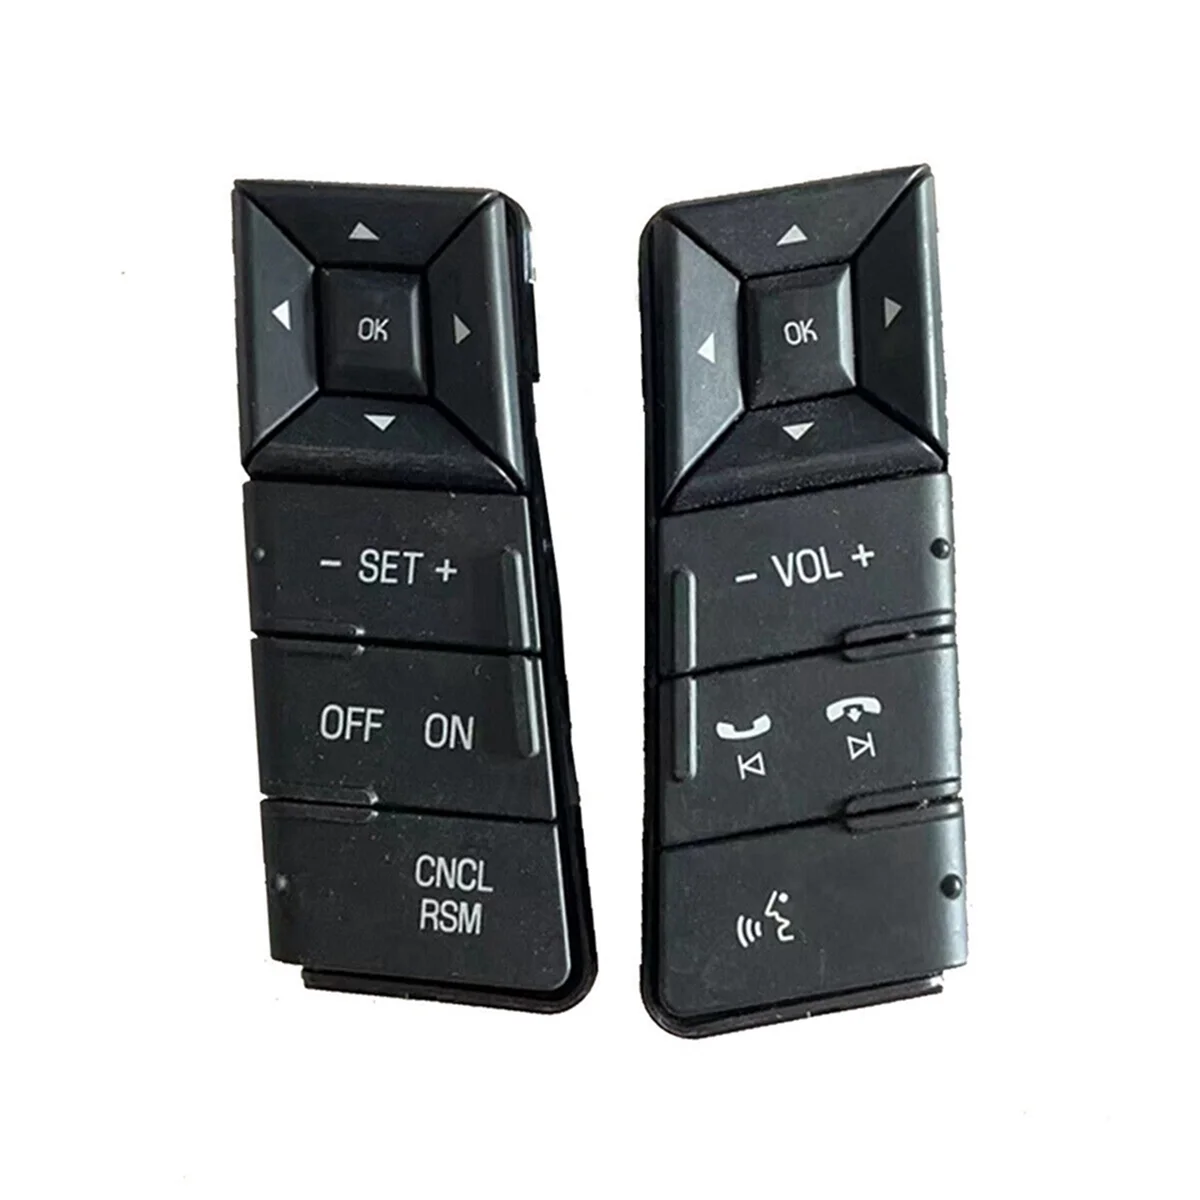 

2 Pcs Car Cruise Control Steering Wheel Buttons Switch for Ford Expedition 2015-2017 FL7T-9E740-ADW, FL7T-9E740-BBW